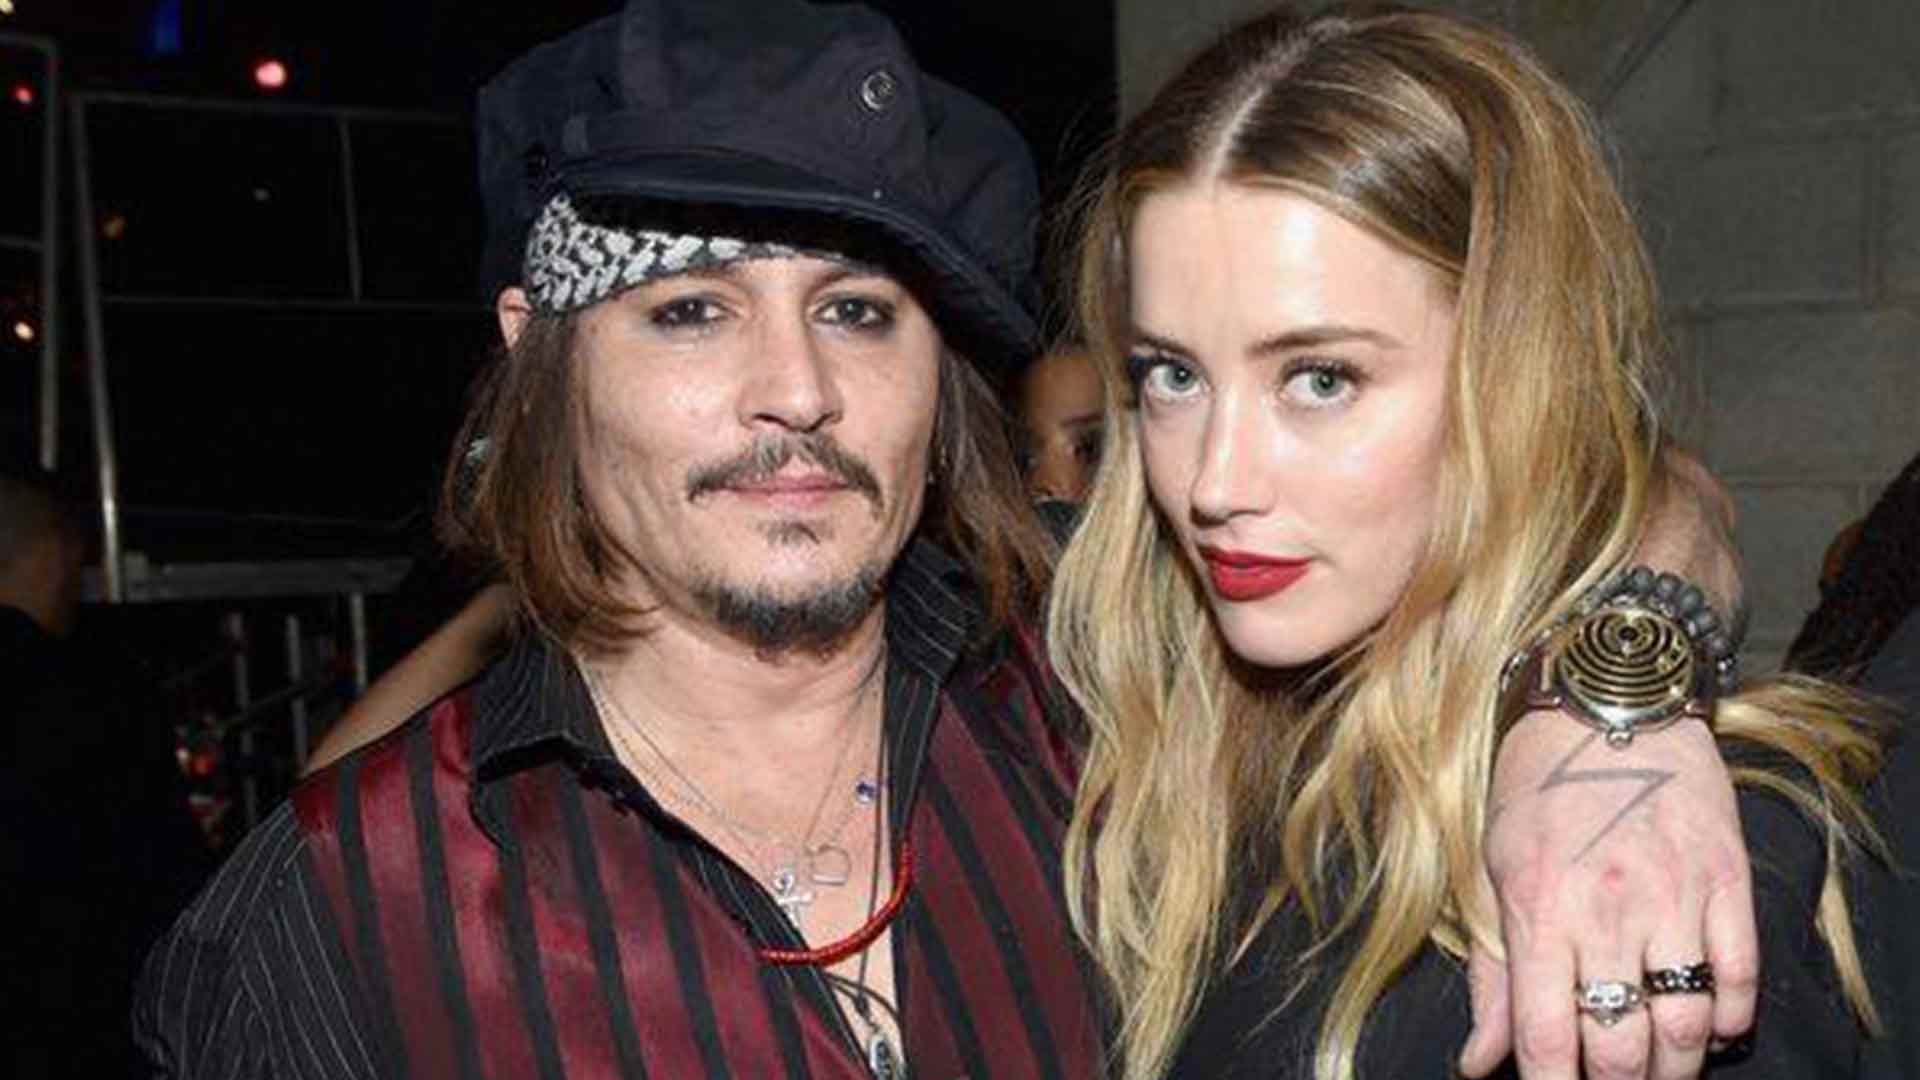 Johnny donates USD 1 million settlement from Amber Heard to charity